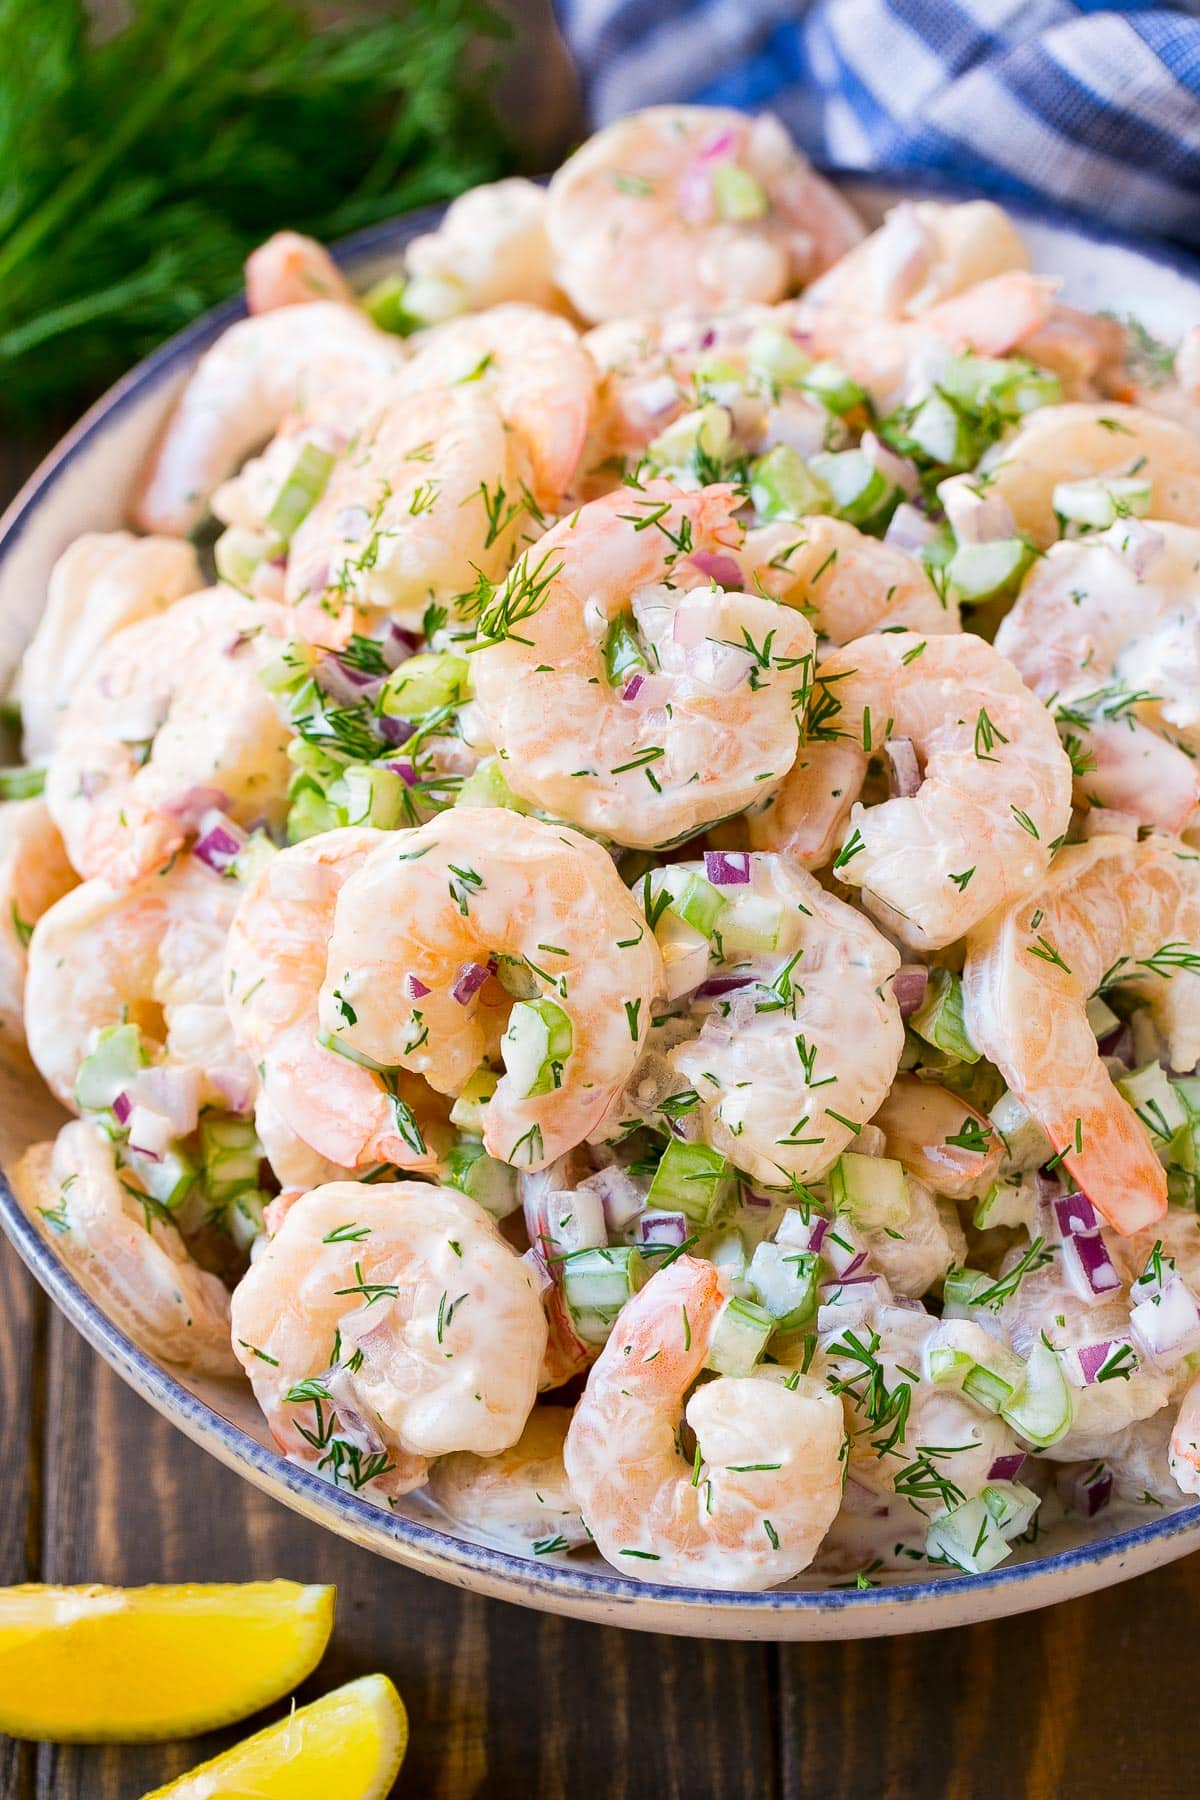 A bowl of shrimp salad with celery and dill, garnished with lemon.